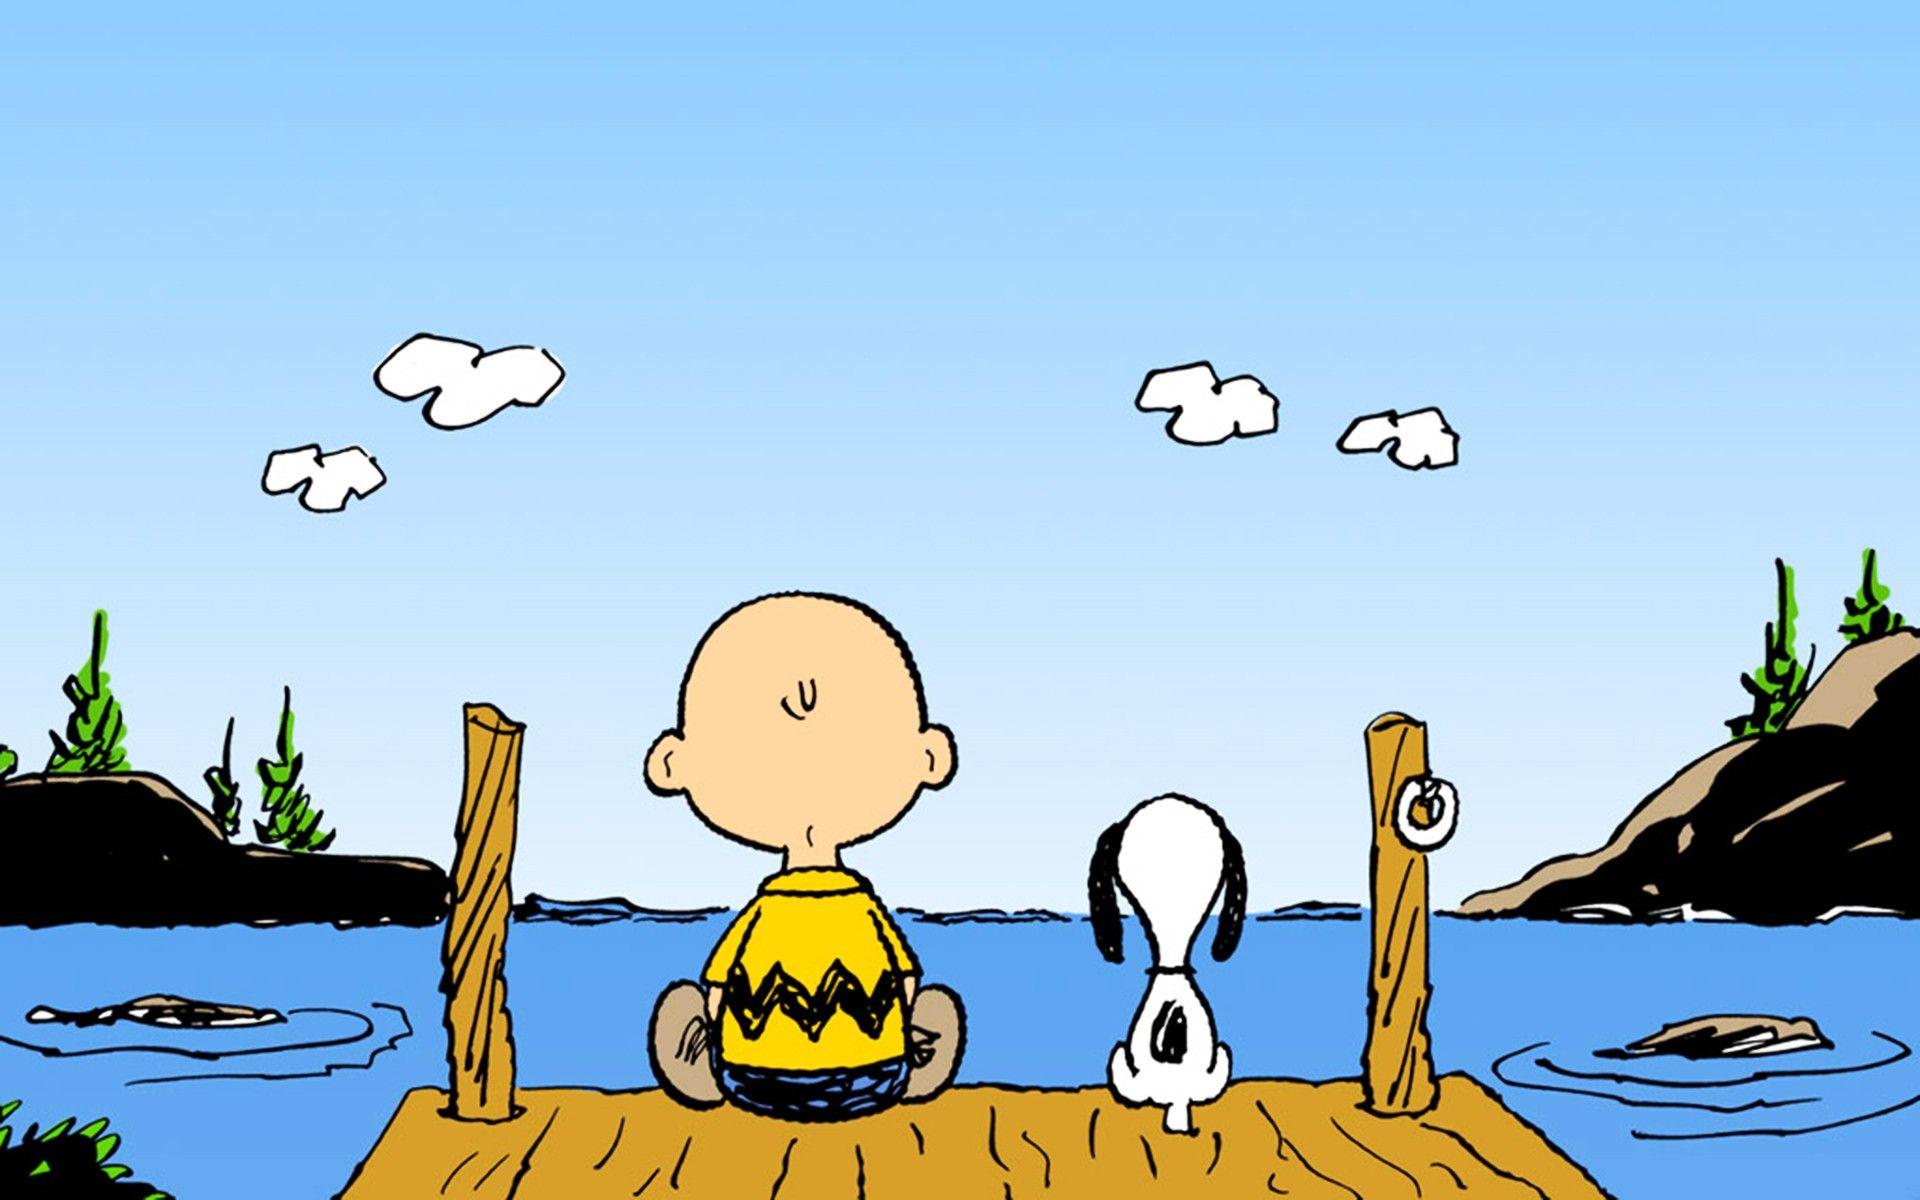 The Peanuts Wallpaper. The Peanuts Background